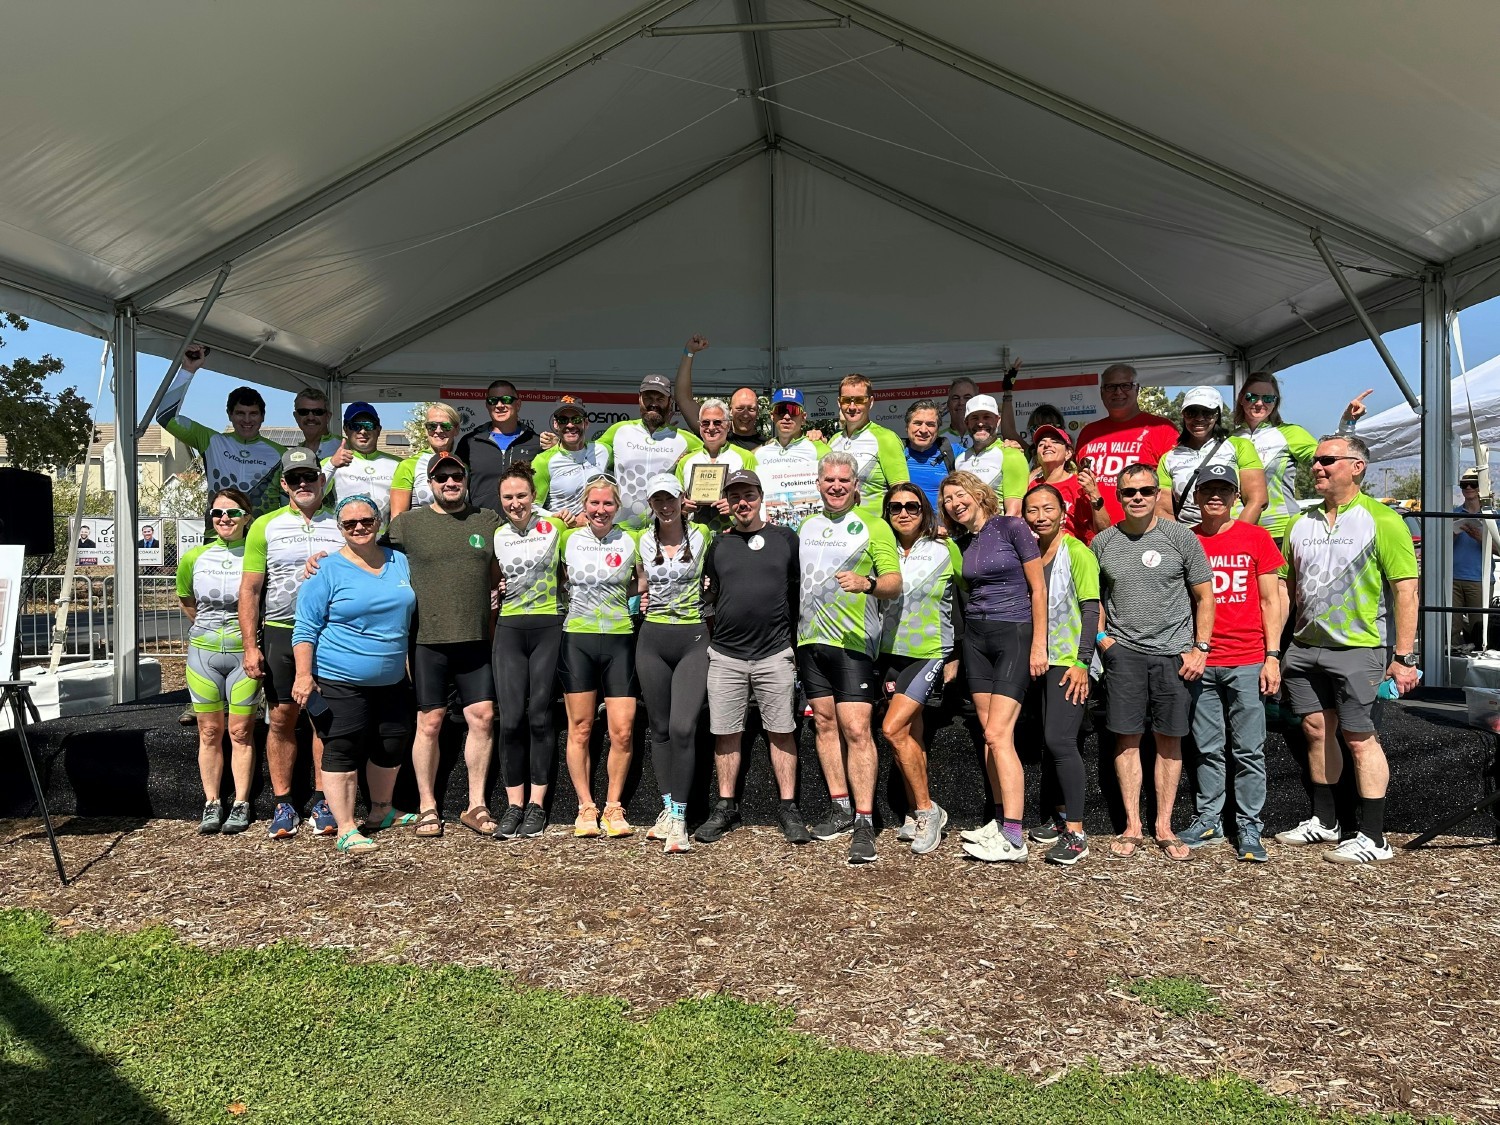 Cytokinetics employees at the Napa Valley Ride to Defeat ALS